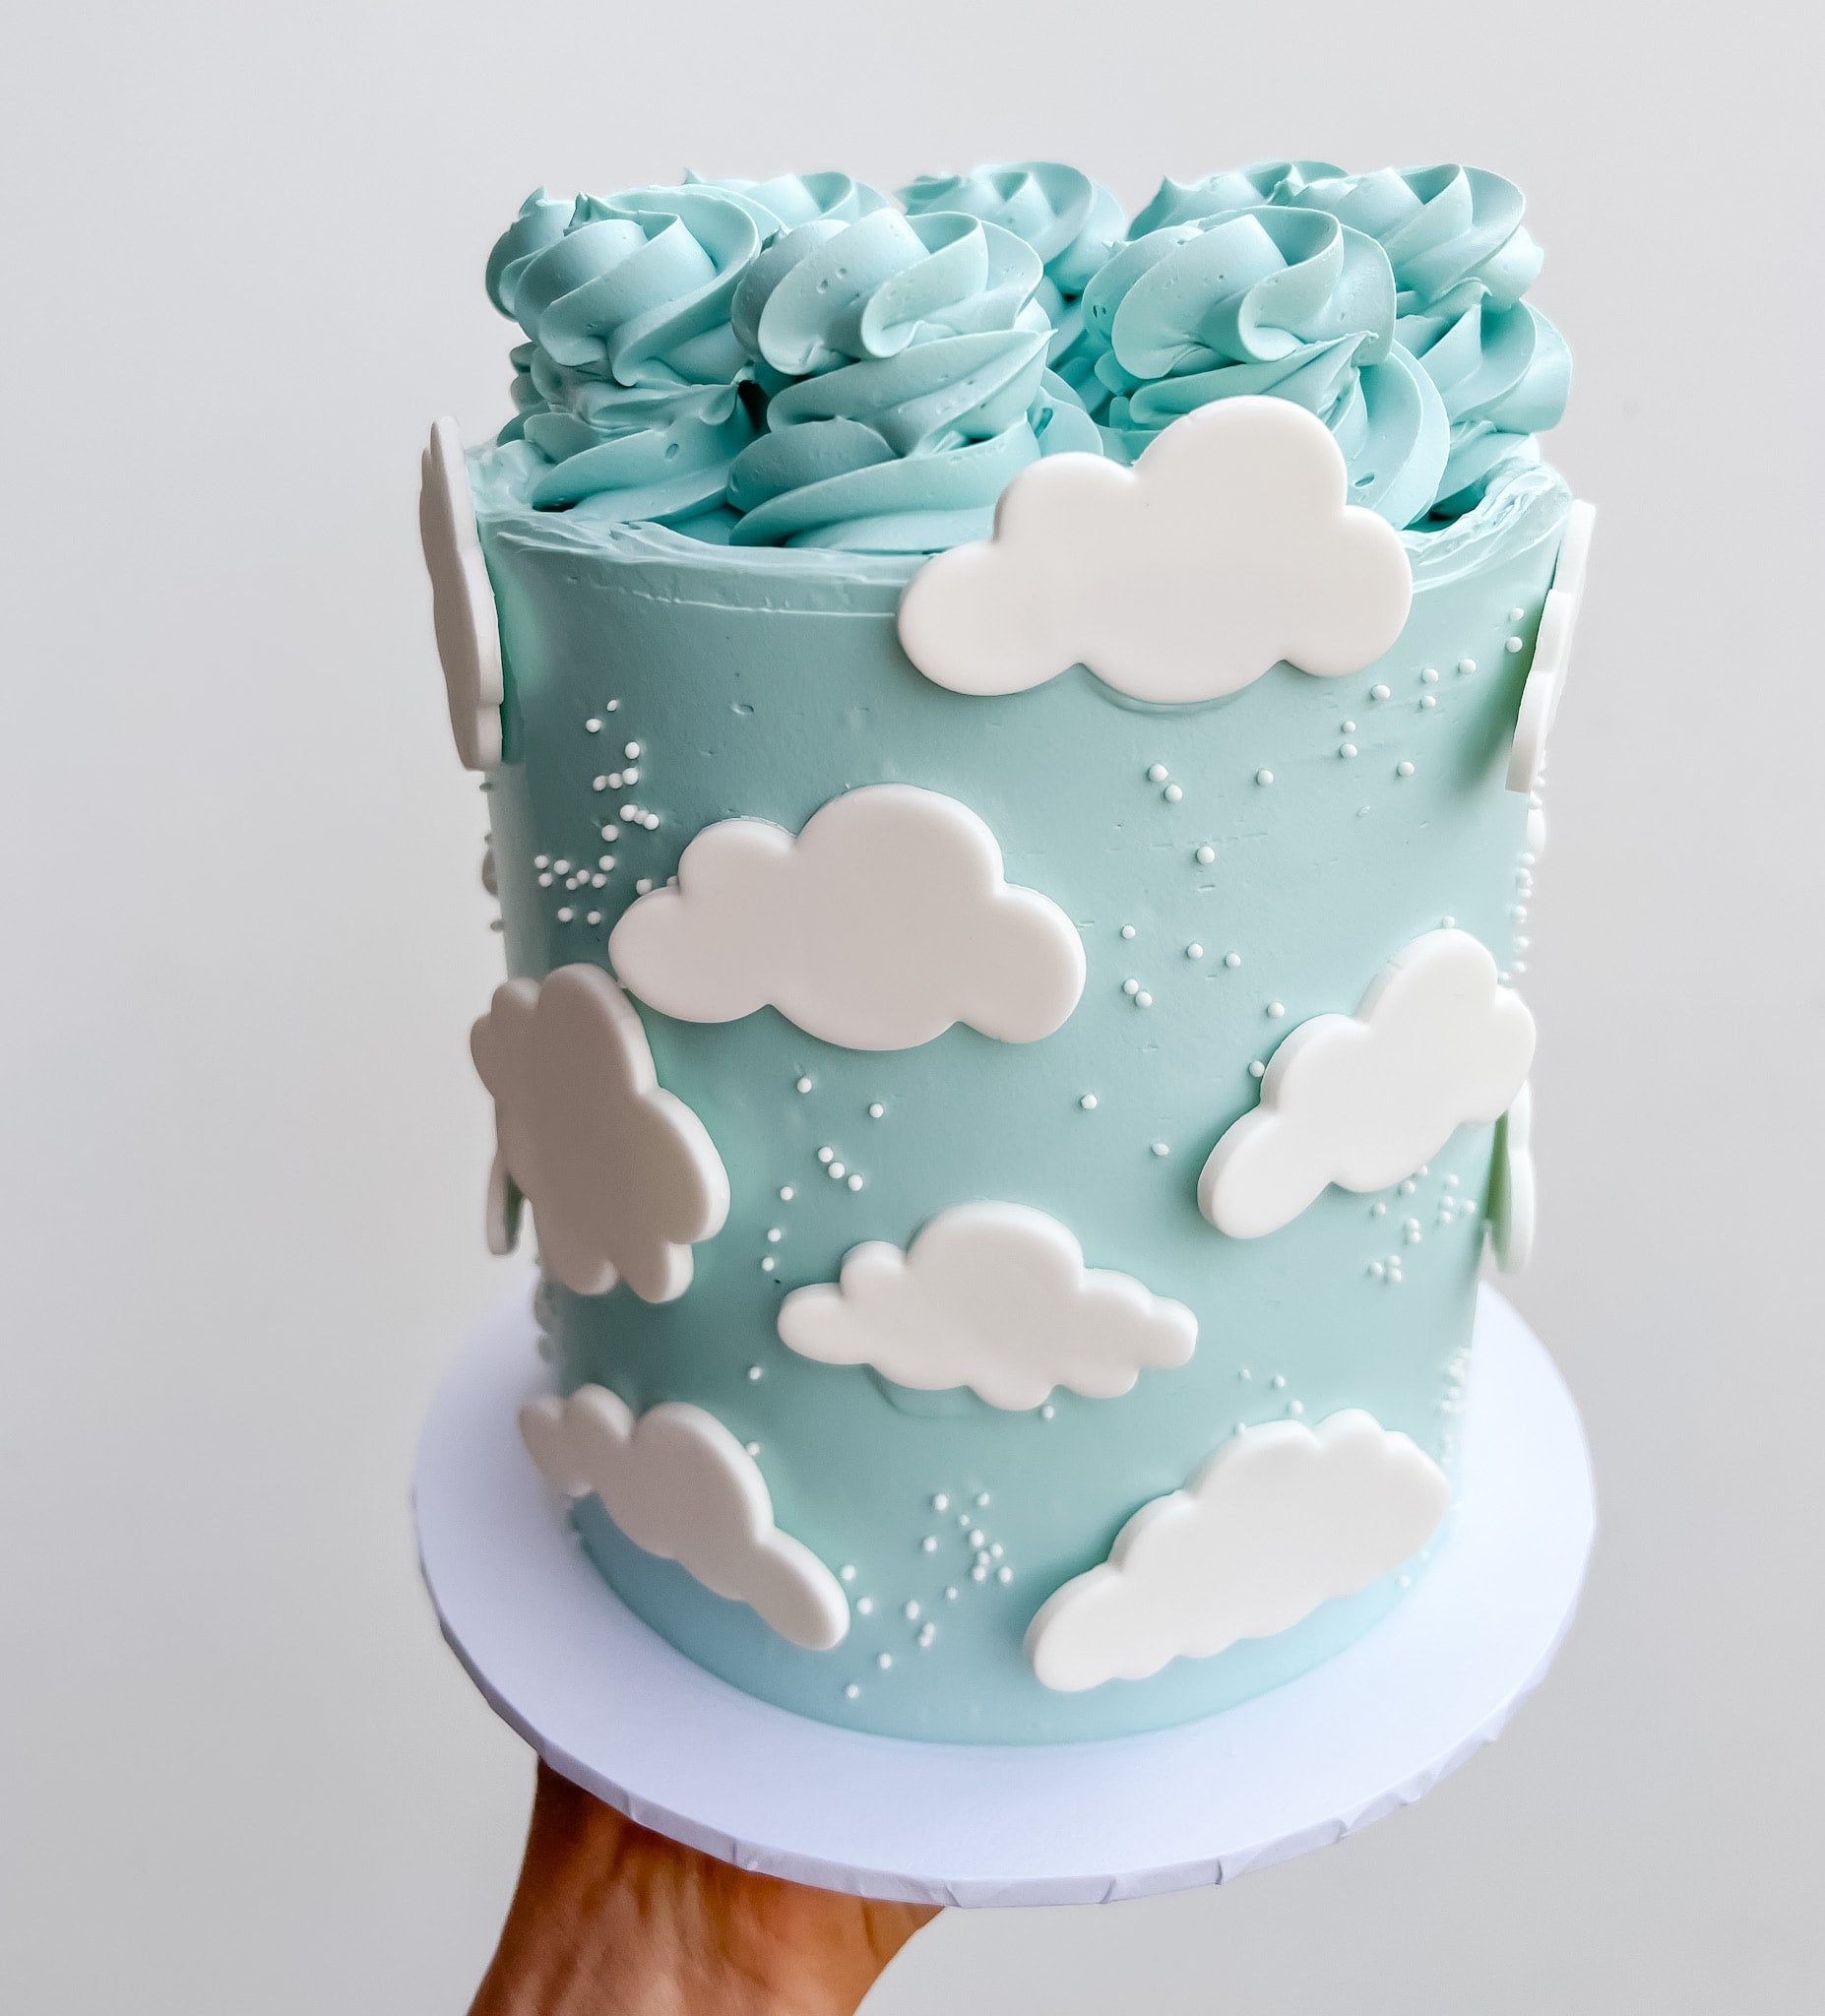 Mesmerising 'cloud cake' fluffy bake uses egg white as main ingredient in  recipe - Mothership.SG - News from Singapore, Asia and around the world